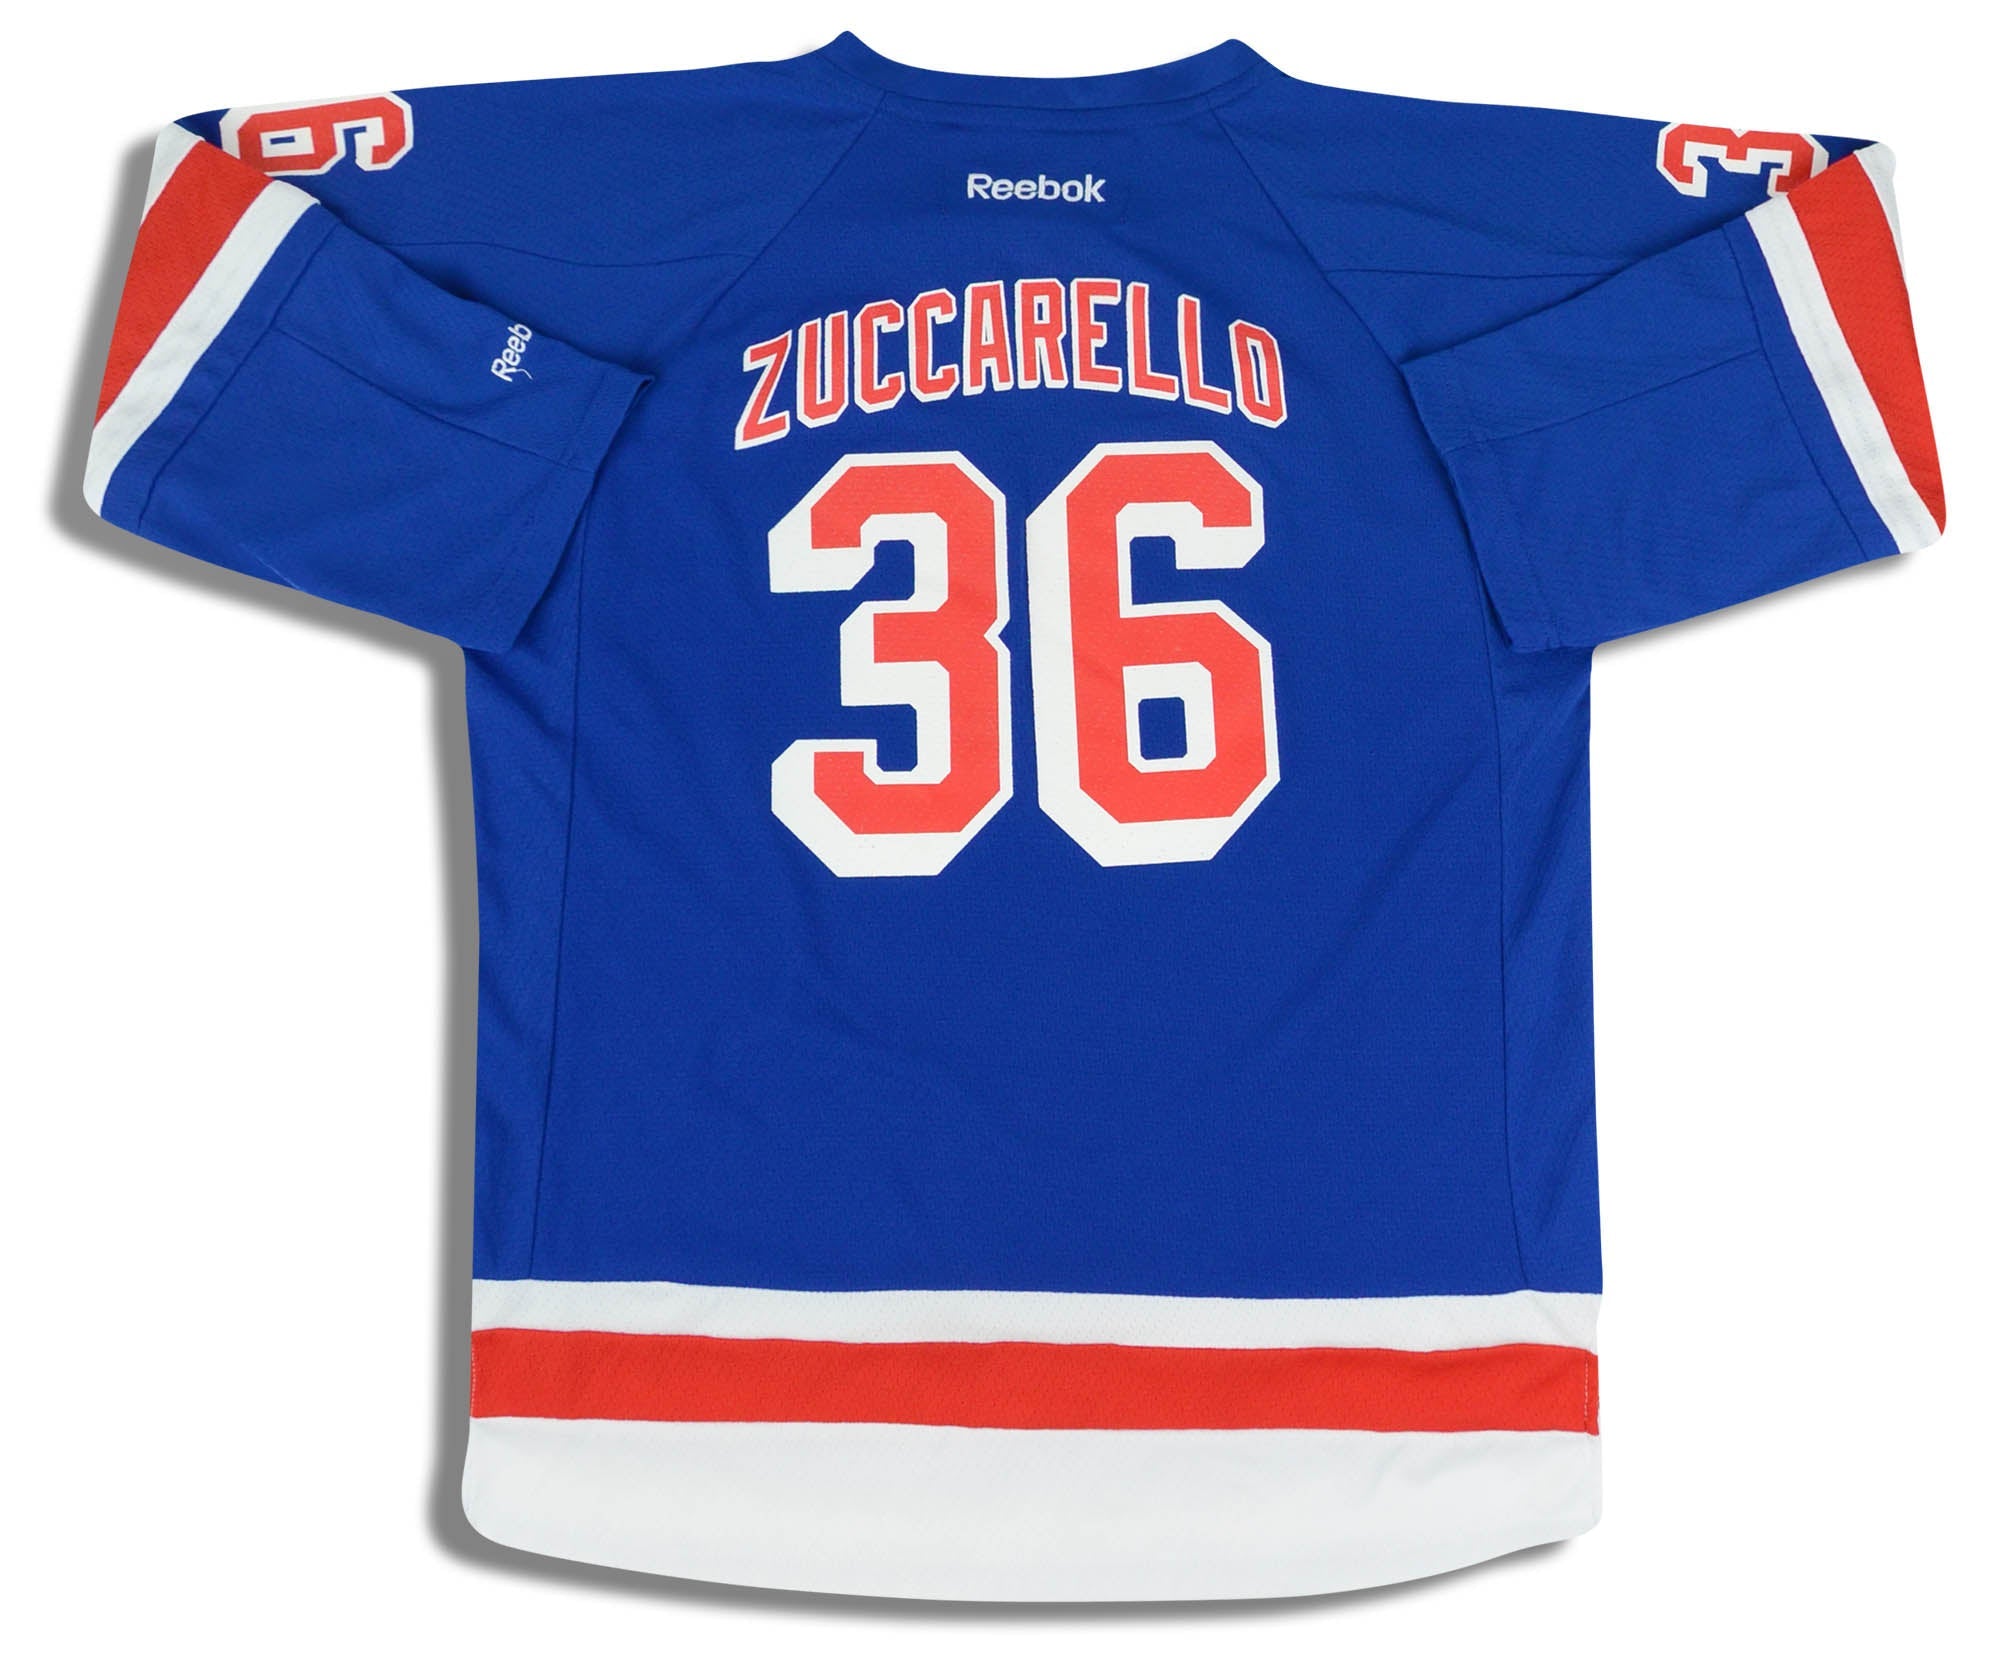 New York Rangers Replica Home Jersey - Youth